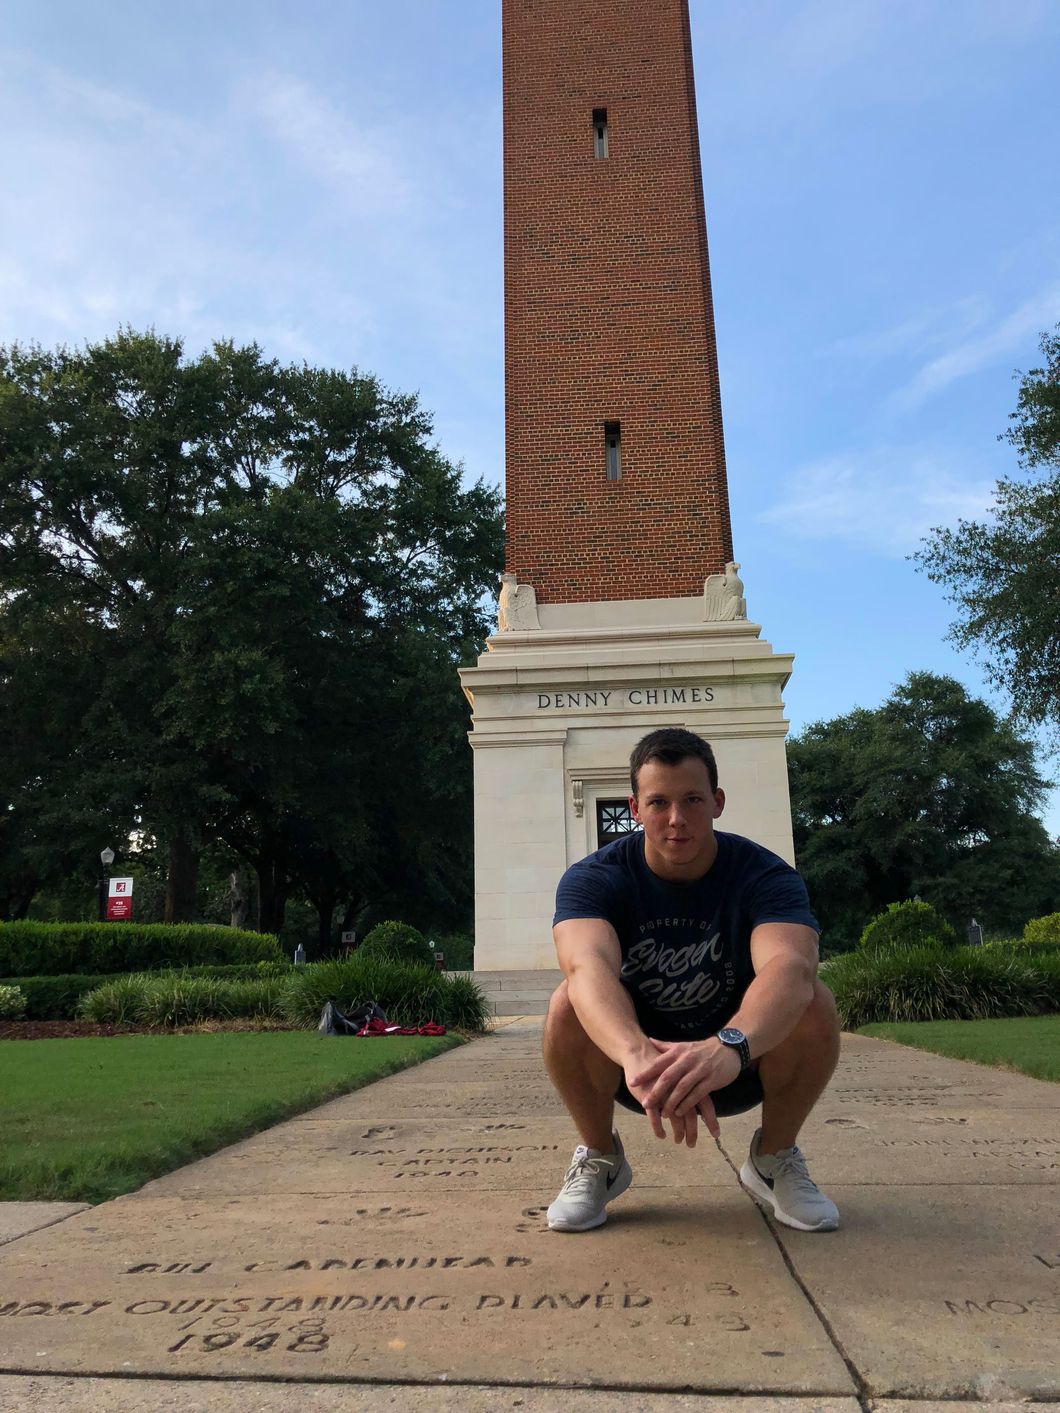 Student kneeling in front of Denny Chimes